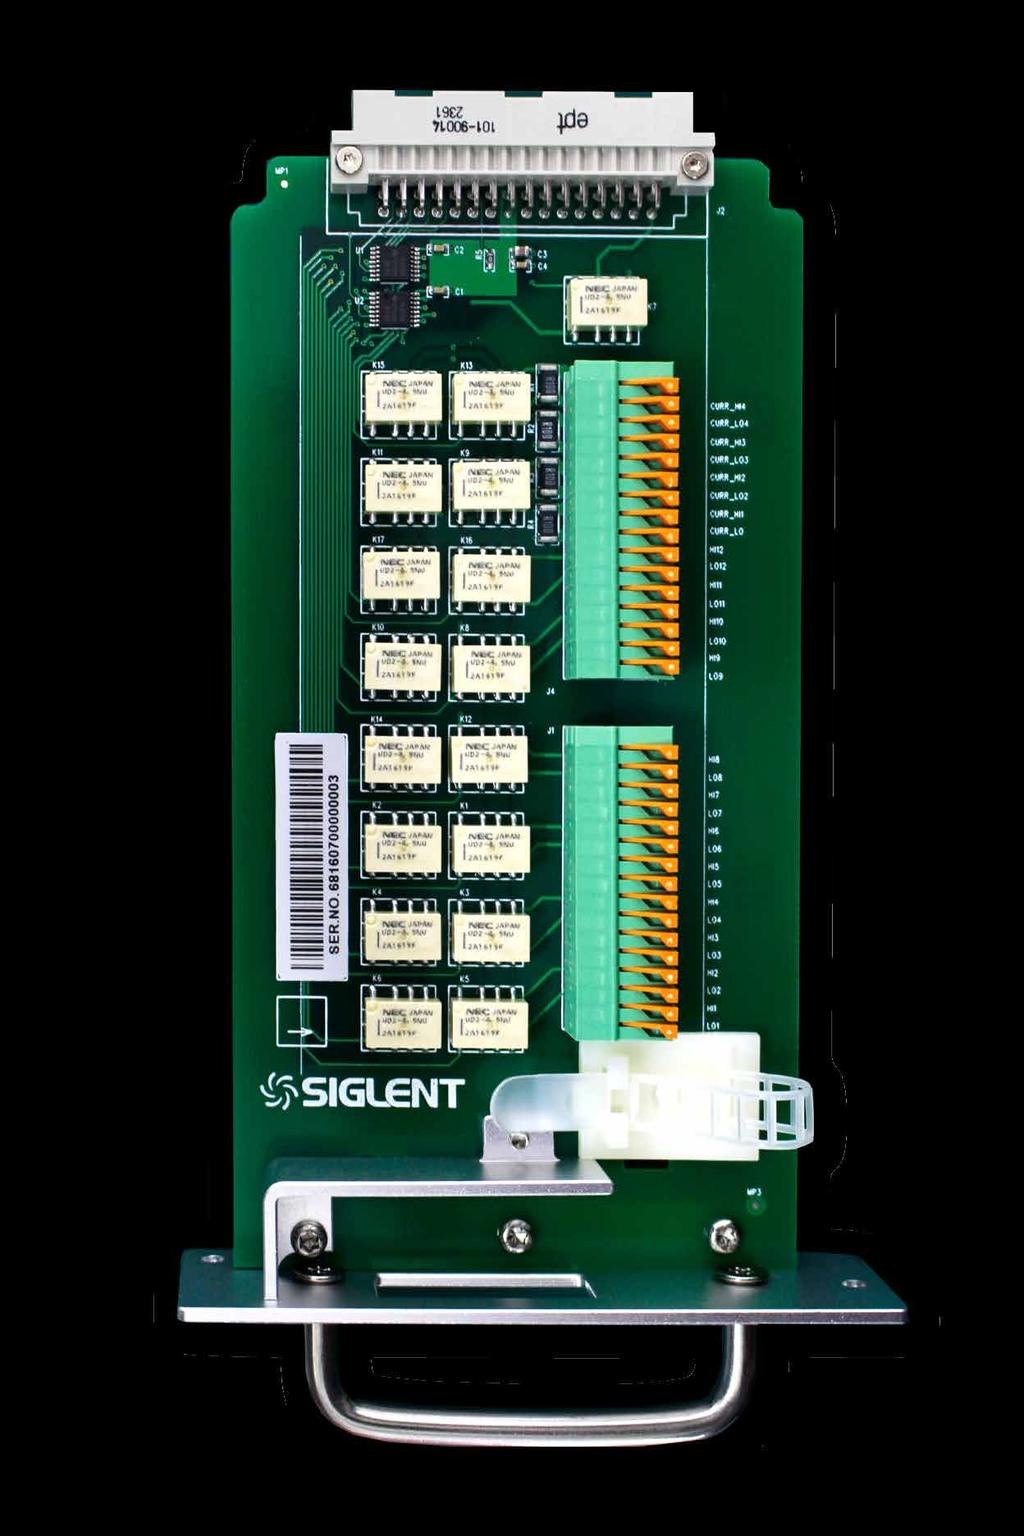 Scanner card SC1016 ( Only for SDM3055-SC ) The SIGLENT Scanner Card SC1016 is a multiplexer that provides multi-point measurement capabilities to the SDM3055-SC.